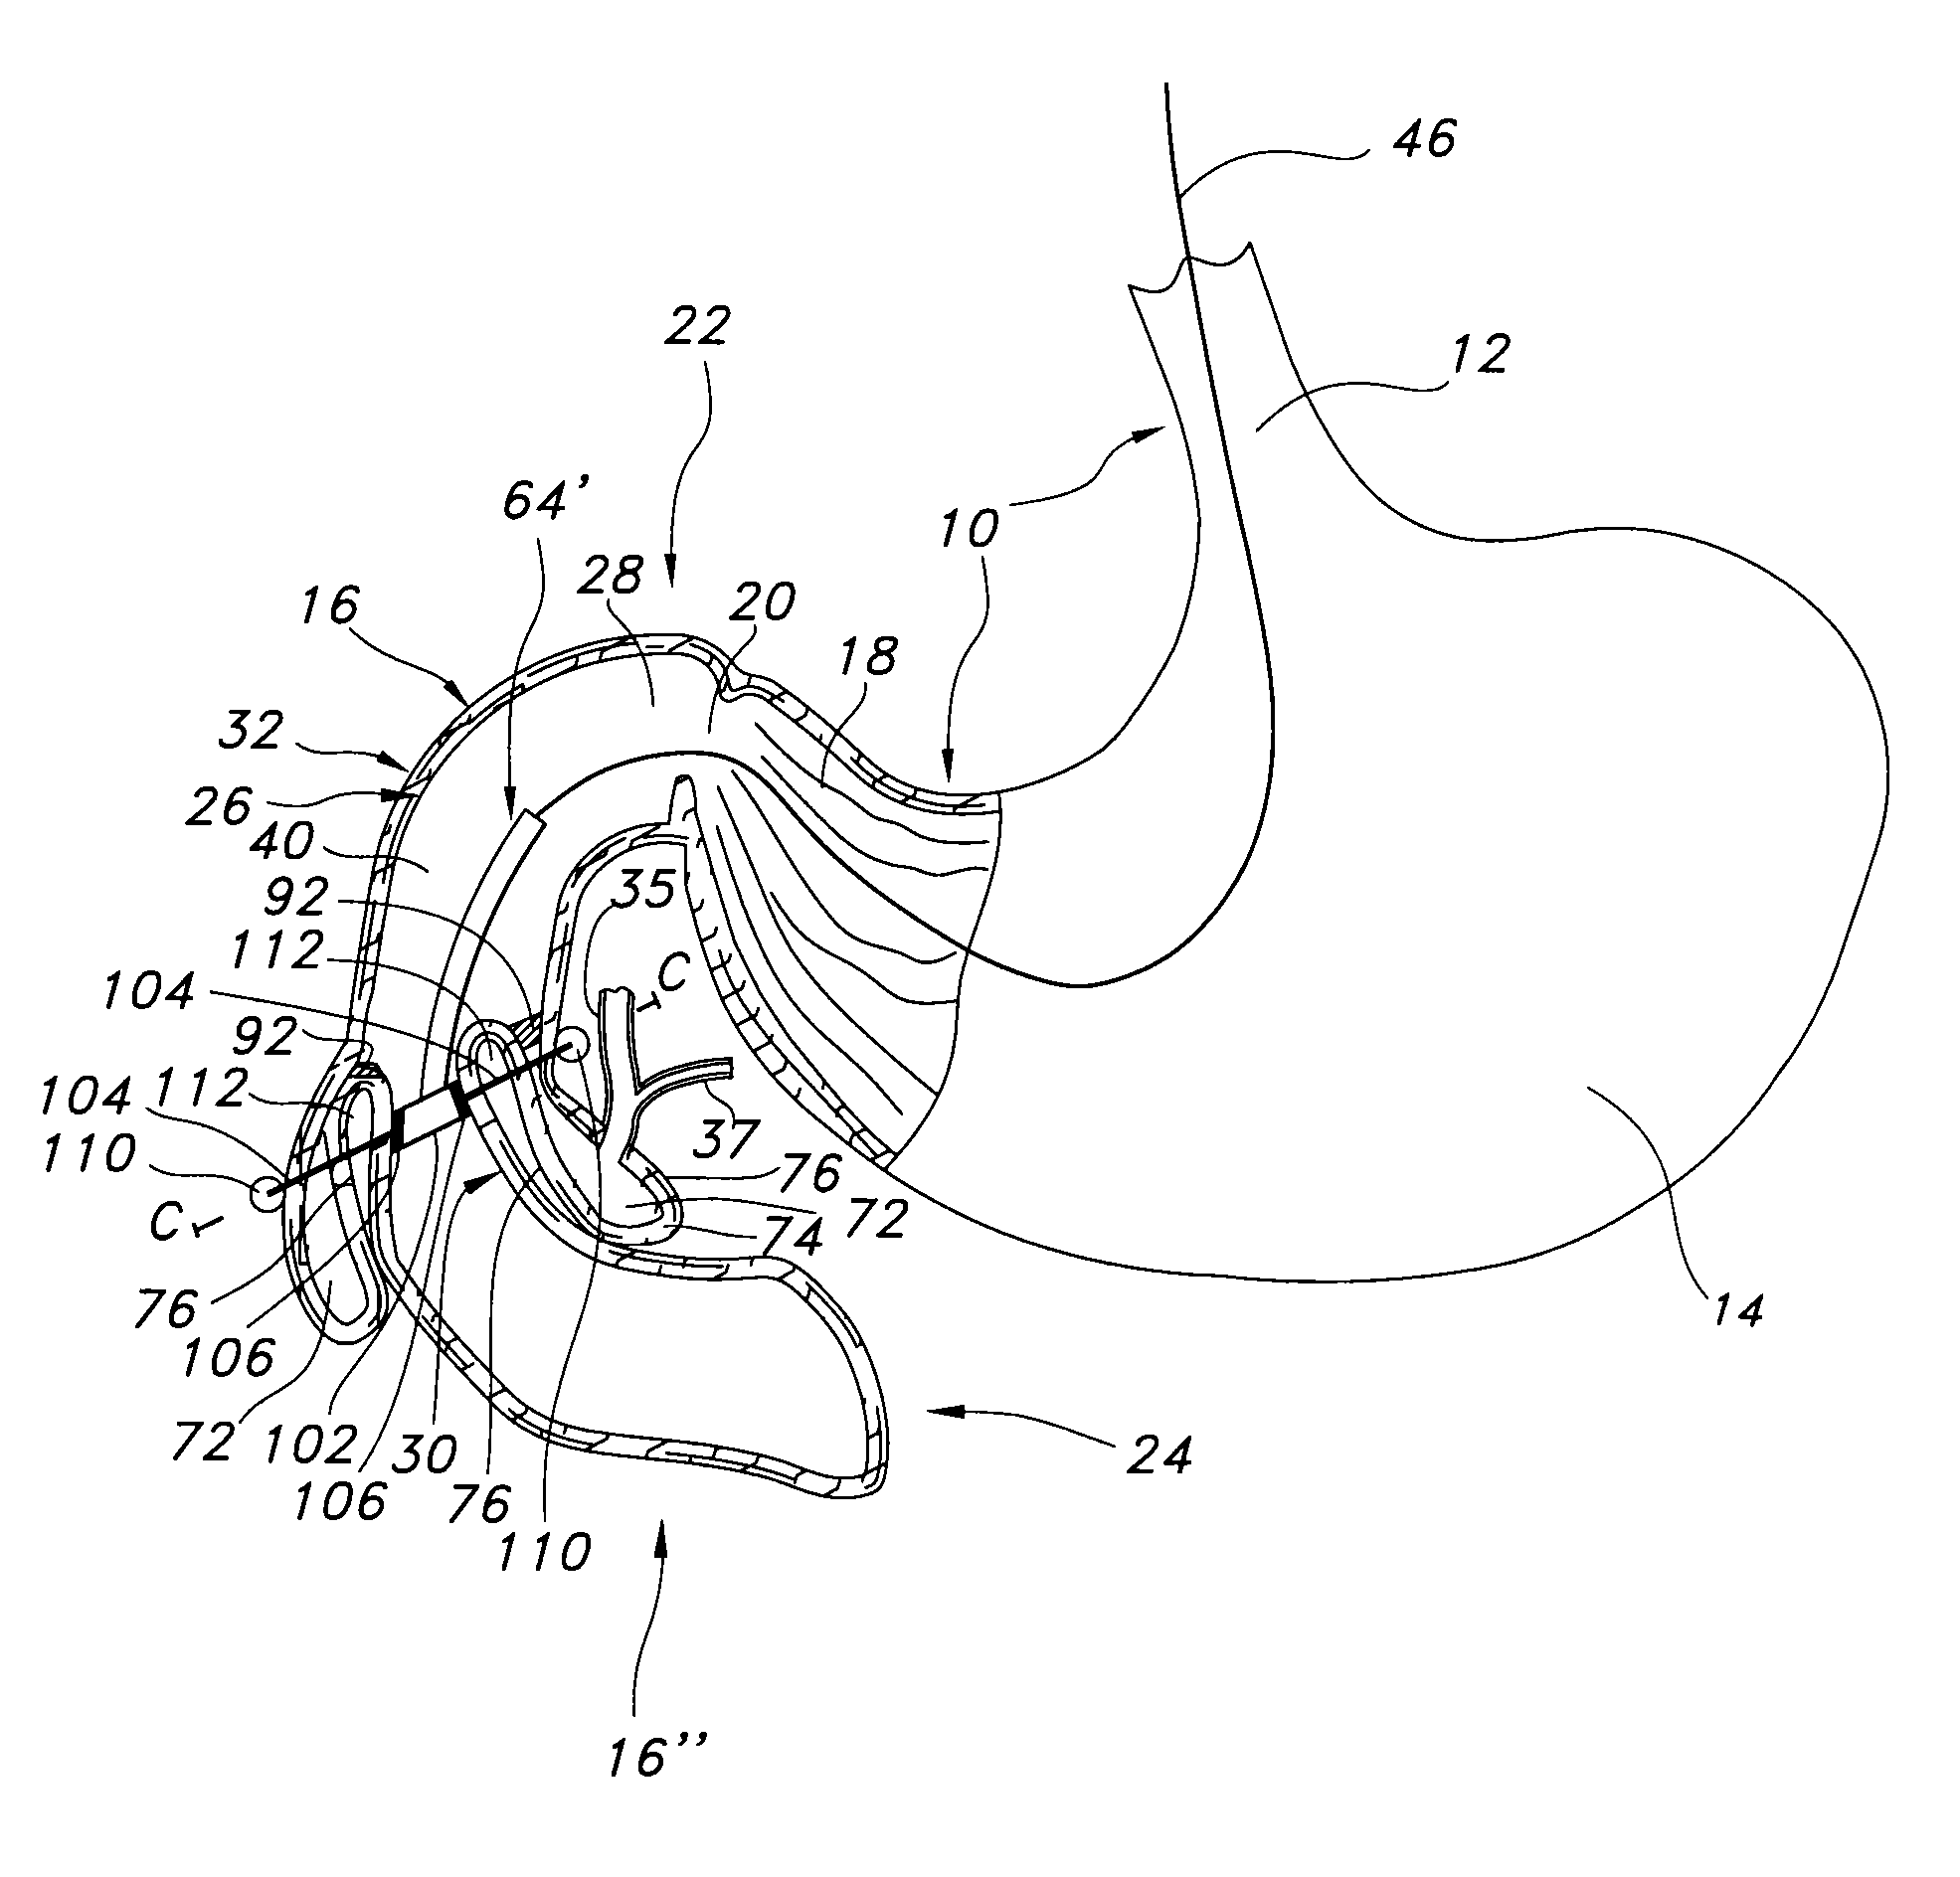 Methods of surgically modifying the duodenum